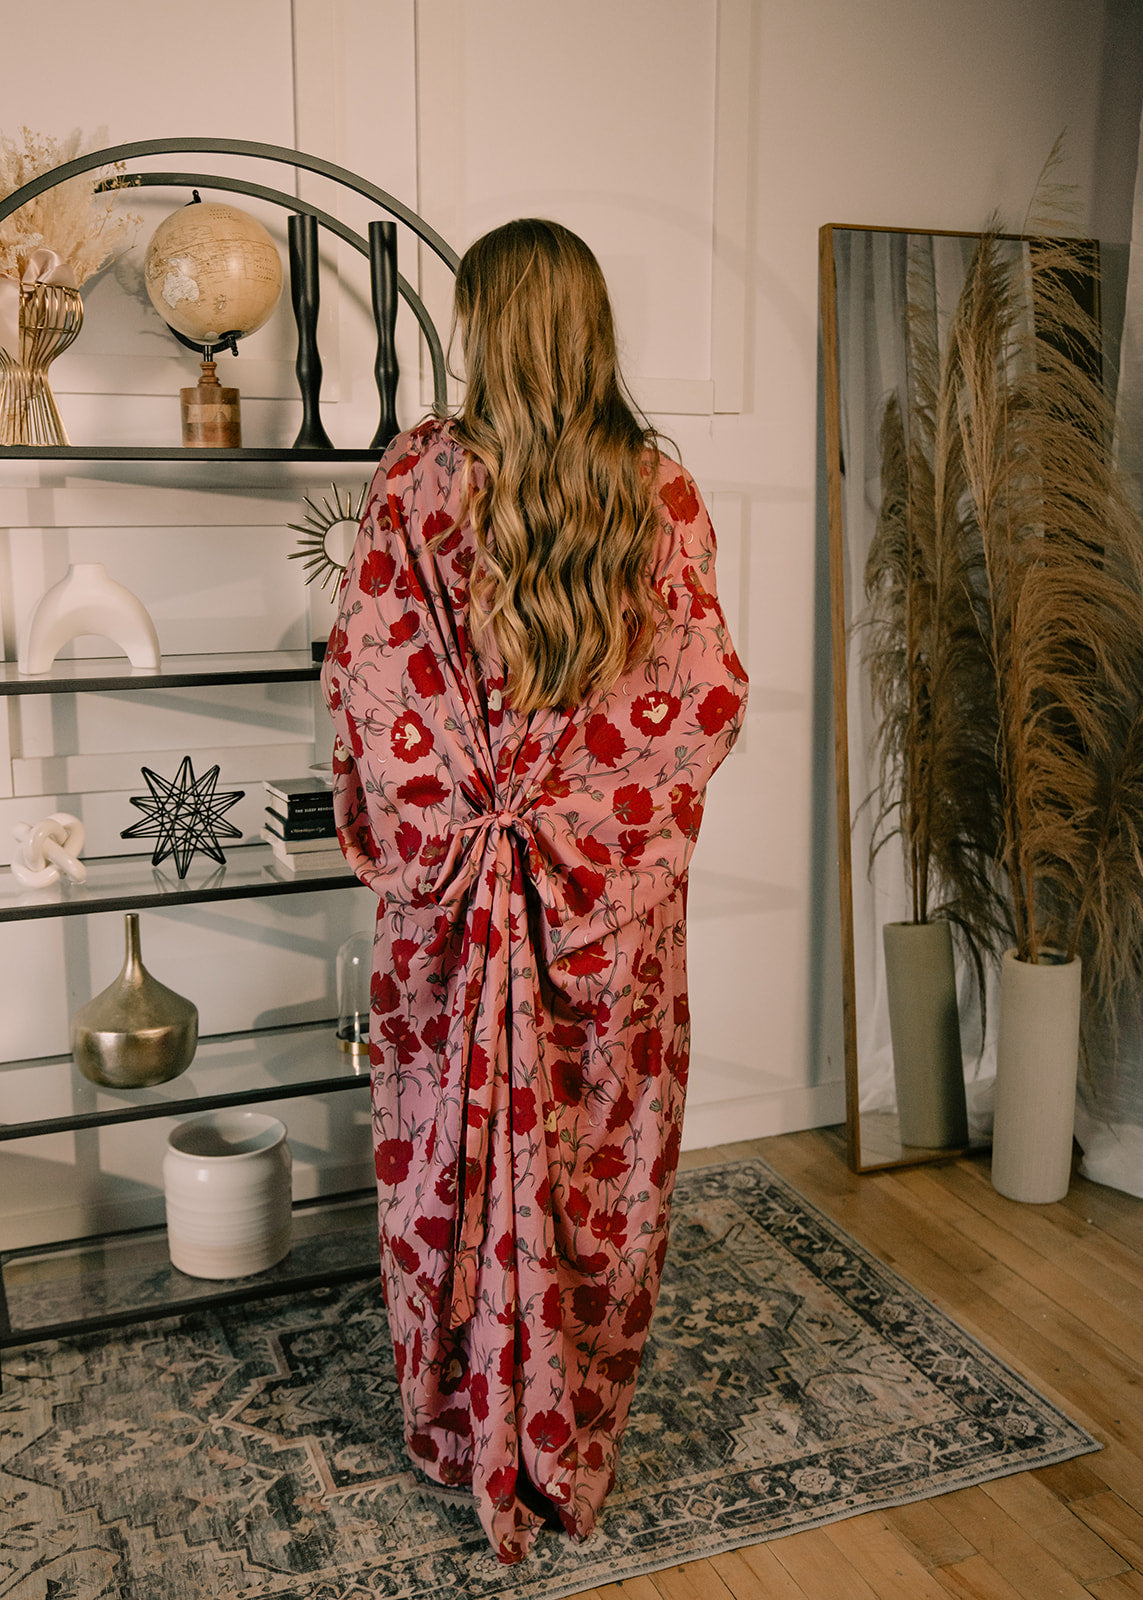 Till Blush Of Night luxury loungewear / pyjama long robe style made out of lightweight Tencel eco-friendly fabric in pink and red colorway 